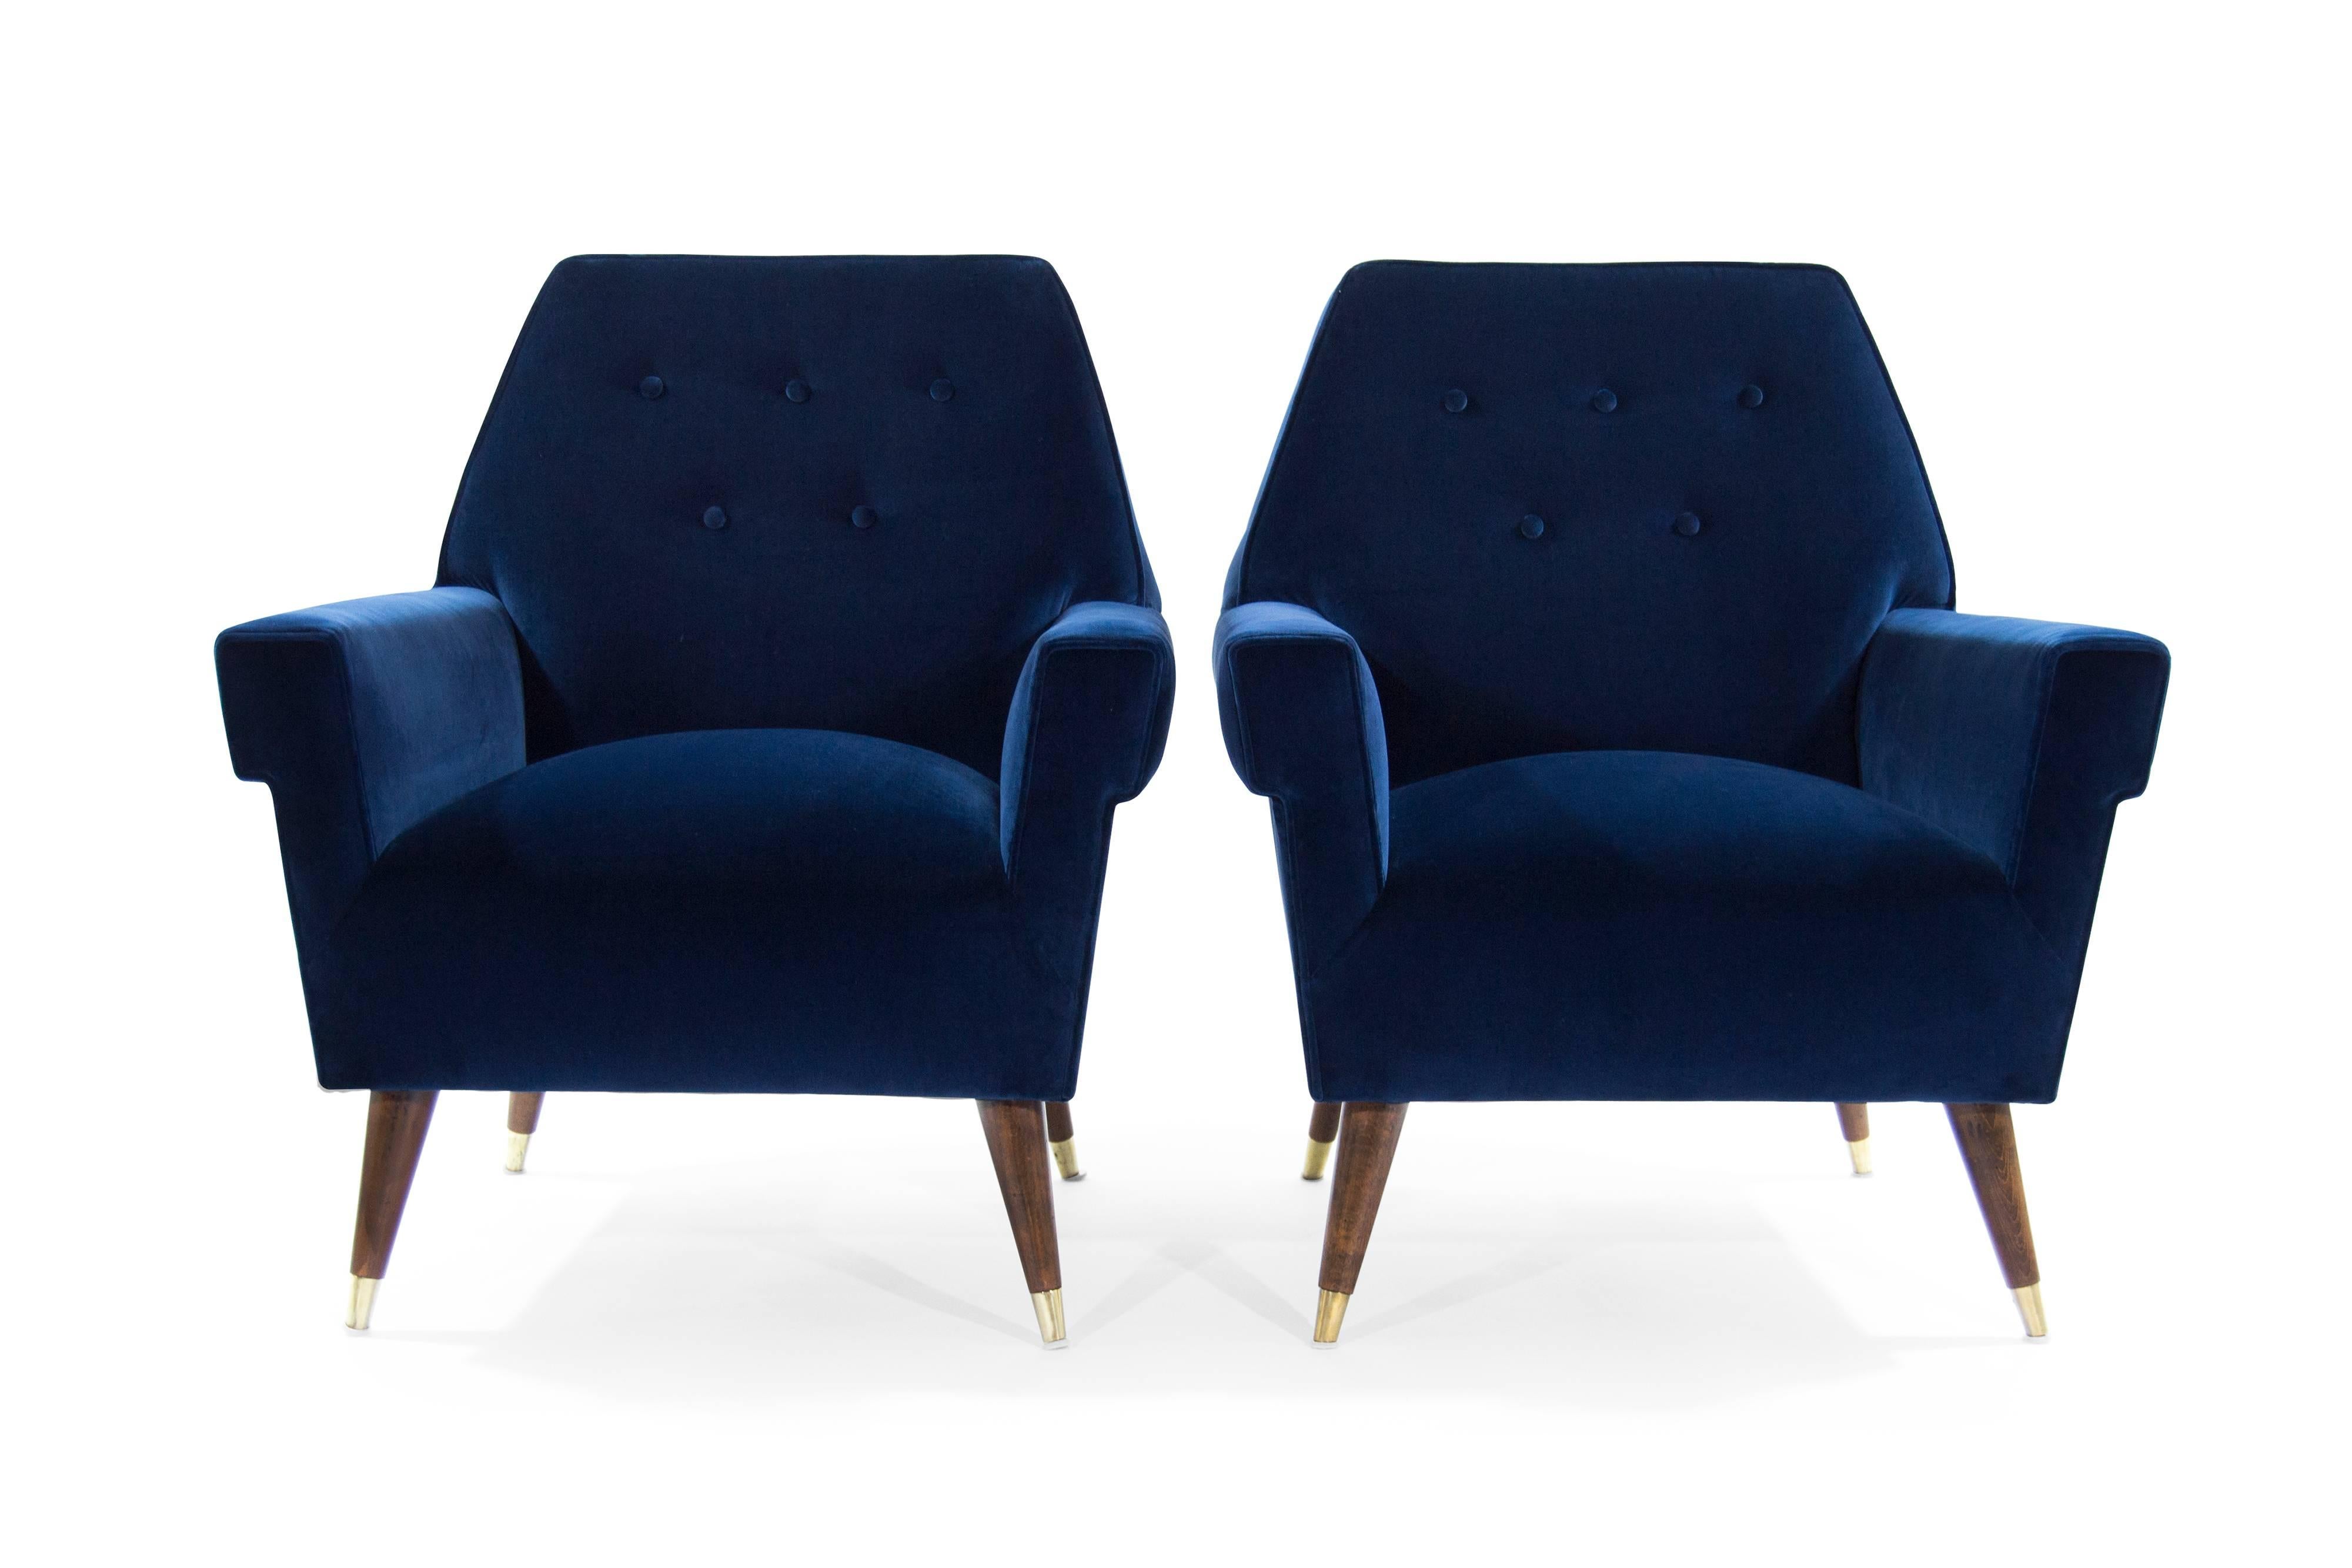 Stunning pair of lounge chairs featuring splayed walnut legs ending in brass sabots. Larger scale and extremely comfortable. Original from Italy, circa 1950s. In the style of Gio Ponti.

Newly upholstered in a beautiful navy blue velvet. Legs fully